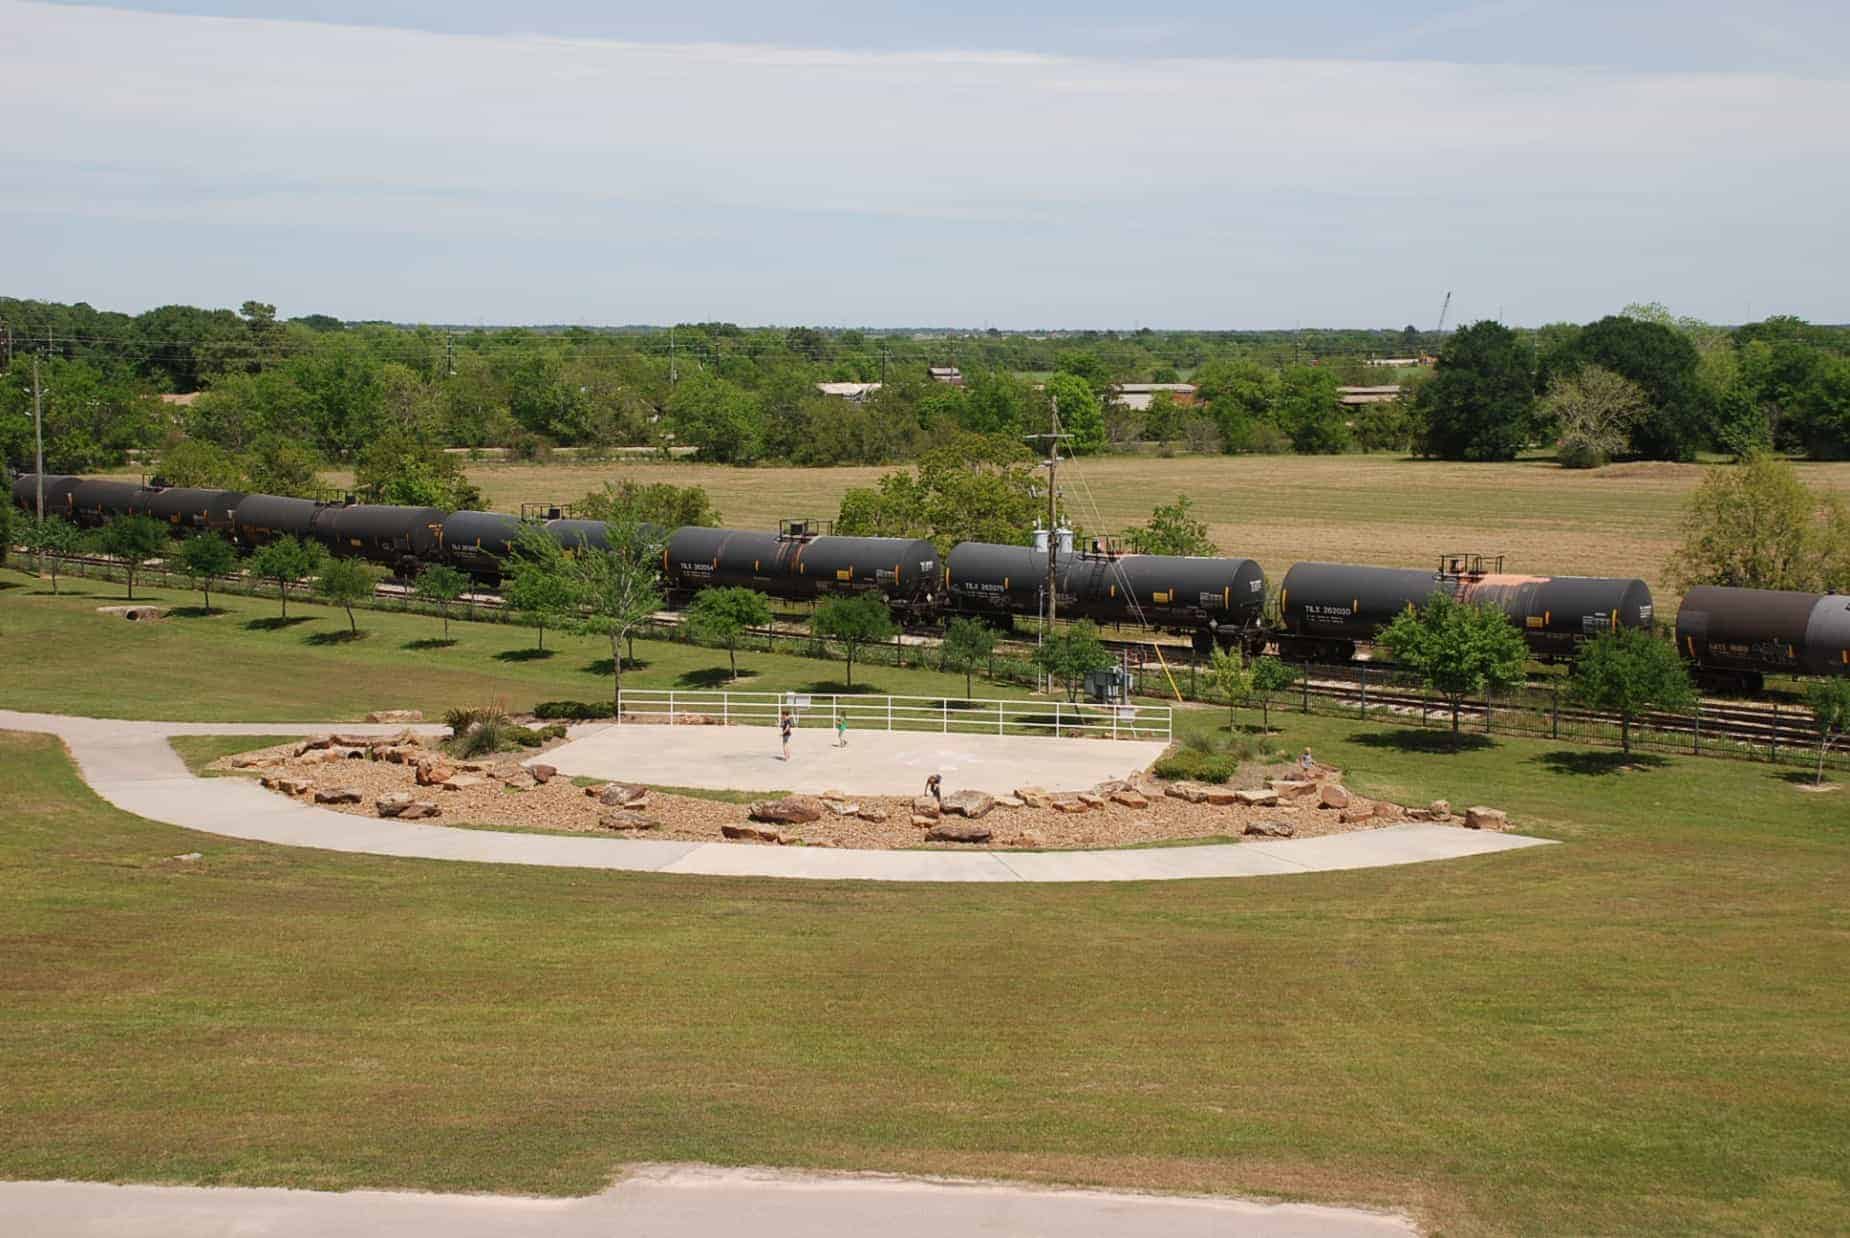 View of Train Track & amphitheater at Hockley Recreational Complex Hockley TX